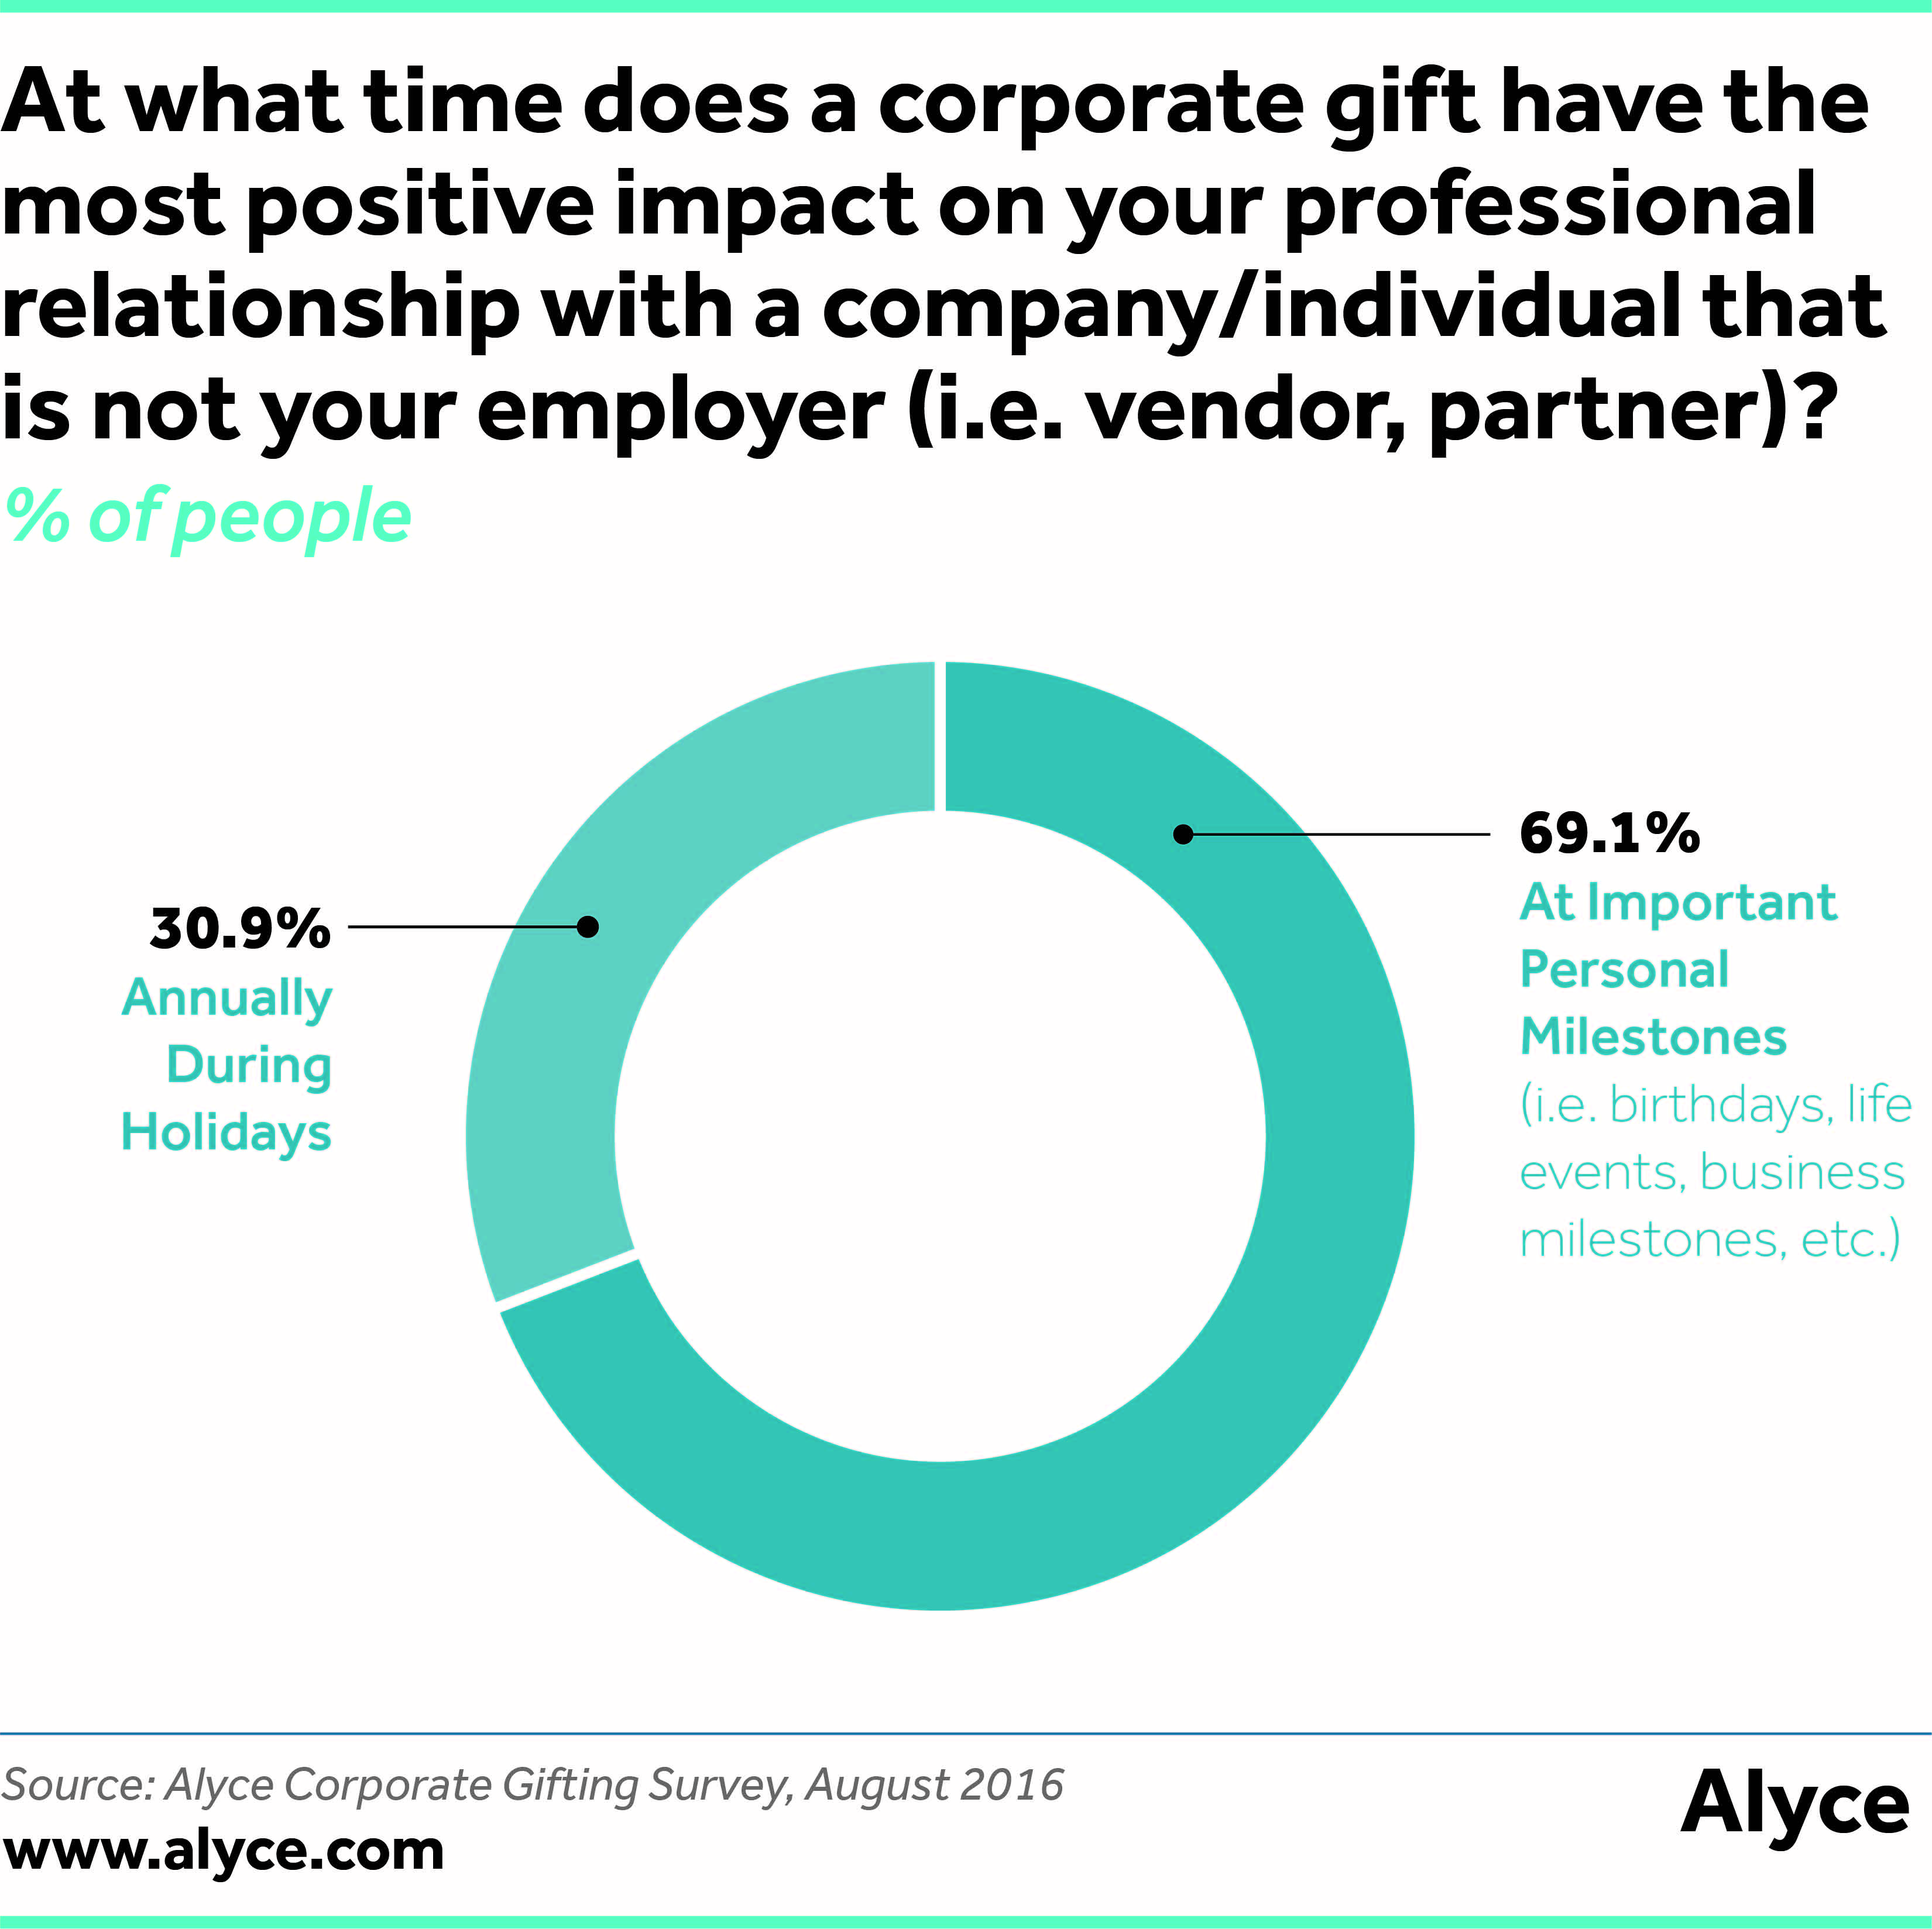 At what time does a corporate gift have the most positive impact on your professional relationship with a company/individual that is not your employer (i.e. vendor, partner)?